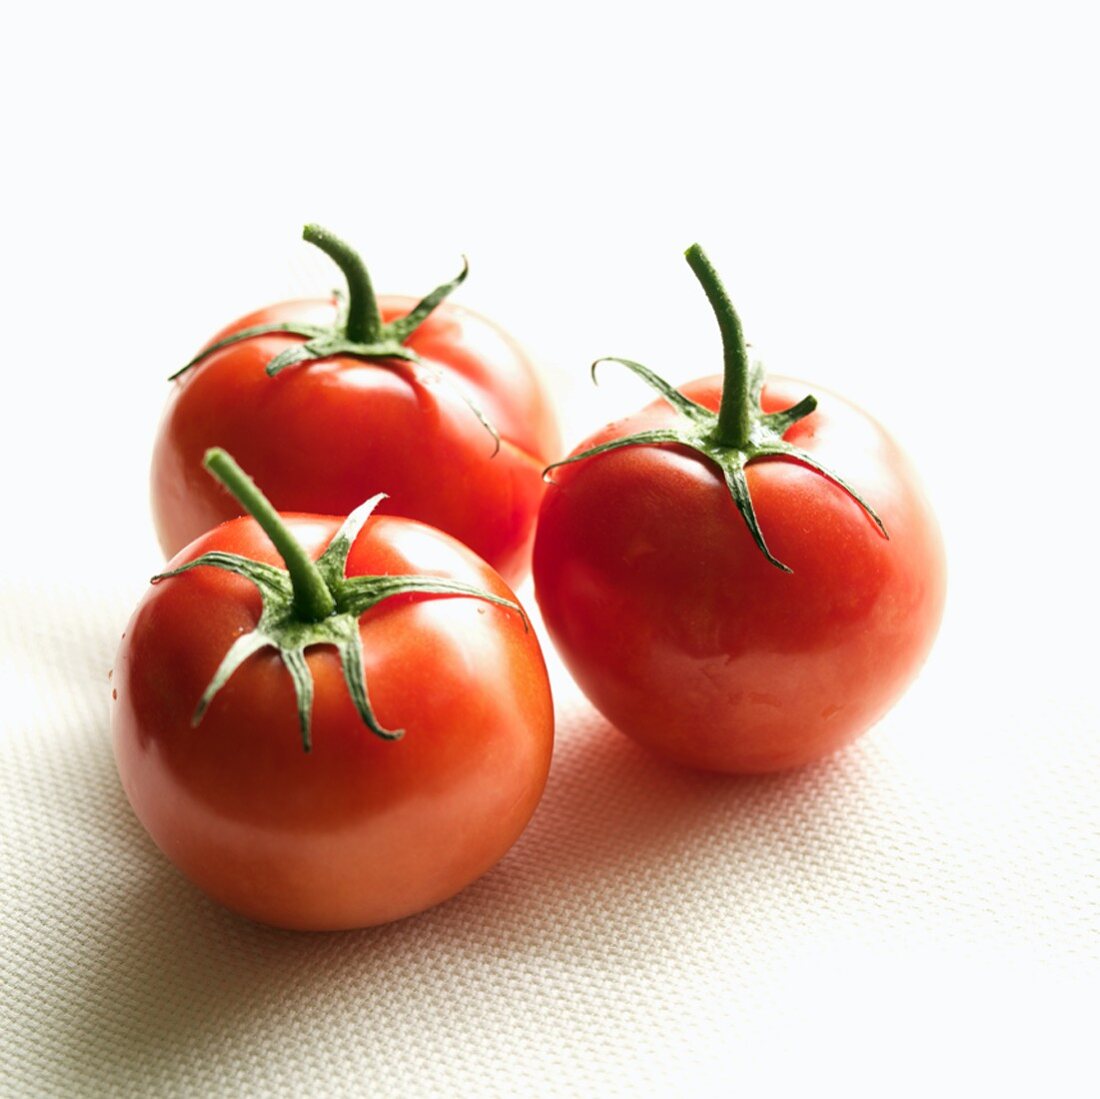 Three Red Tomatoes with Stems